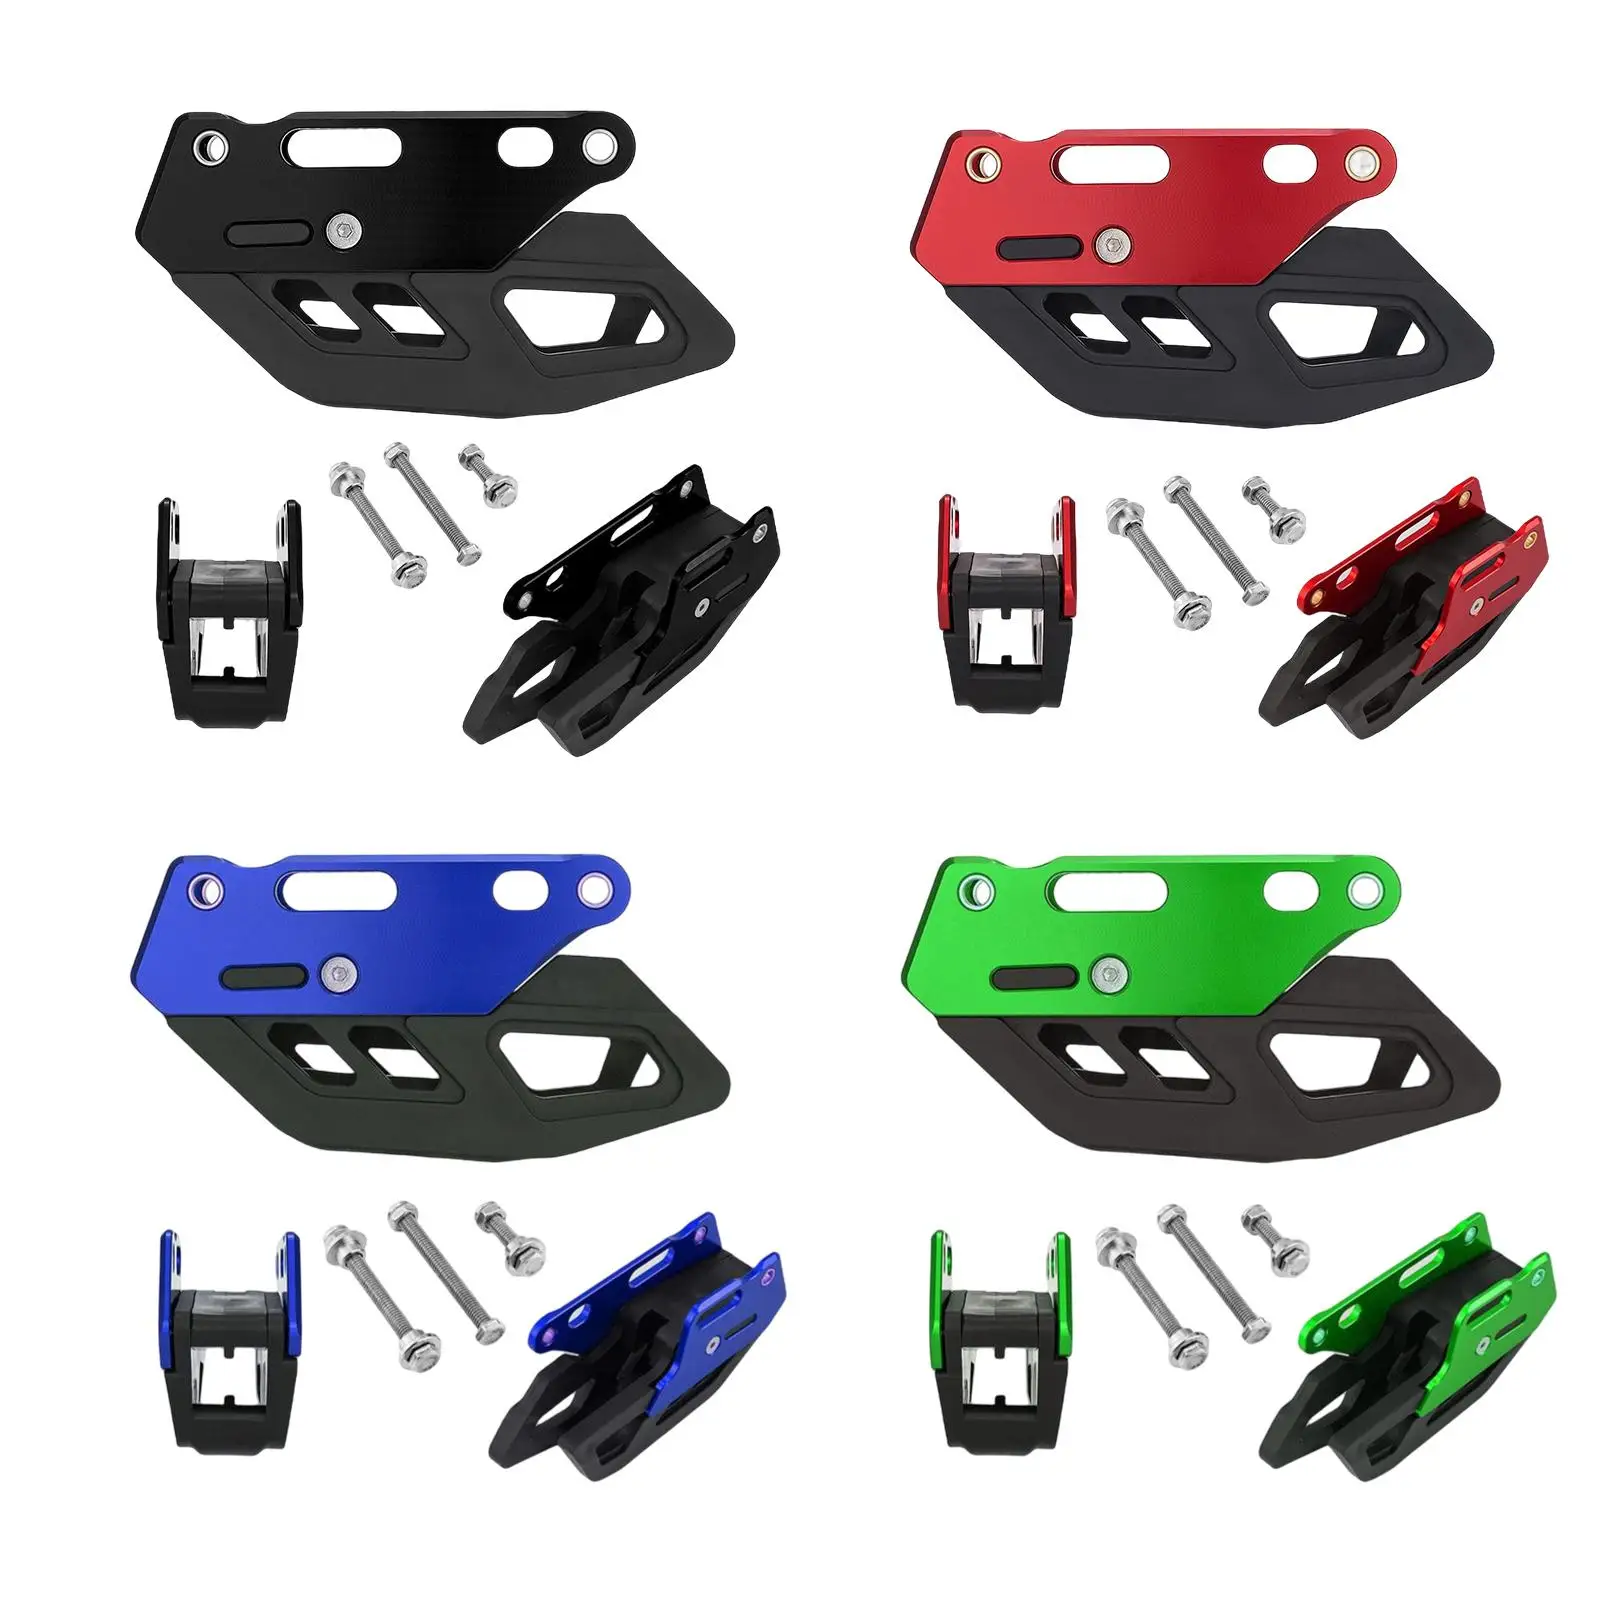 Motorcycle Chain Guard   Protector Replaces Easy to Install Universal